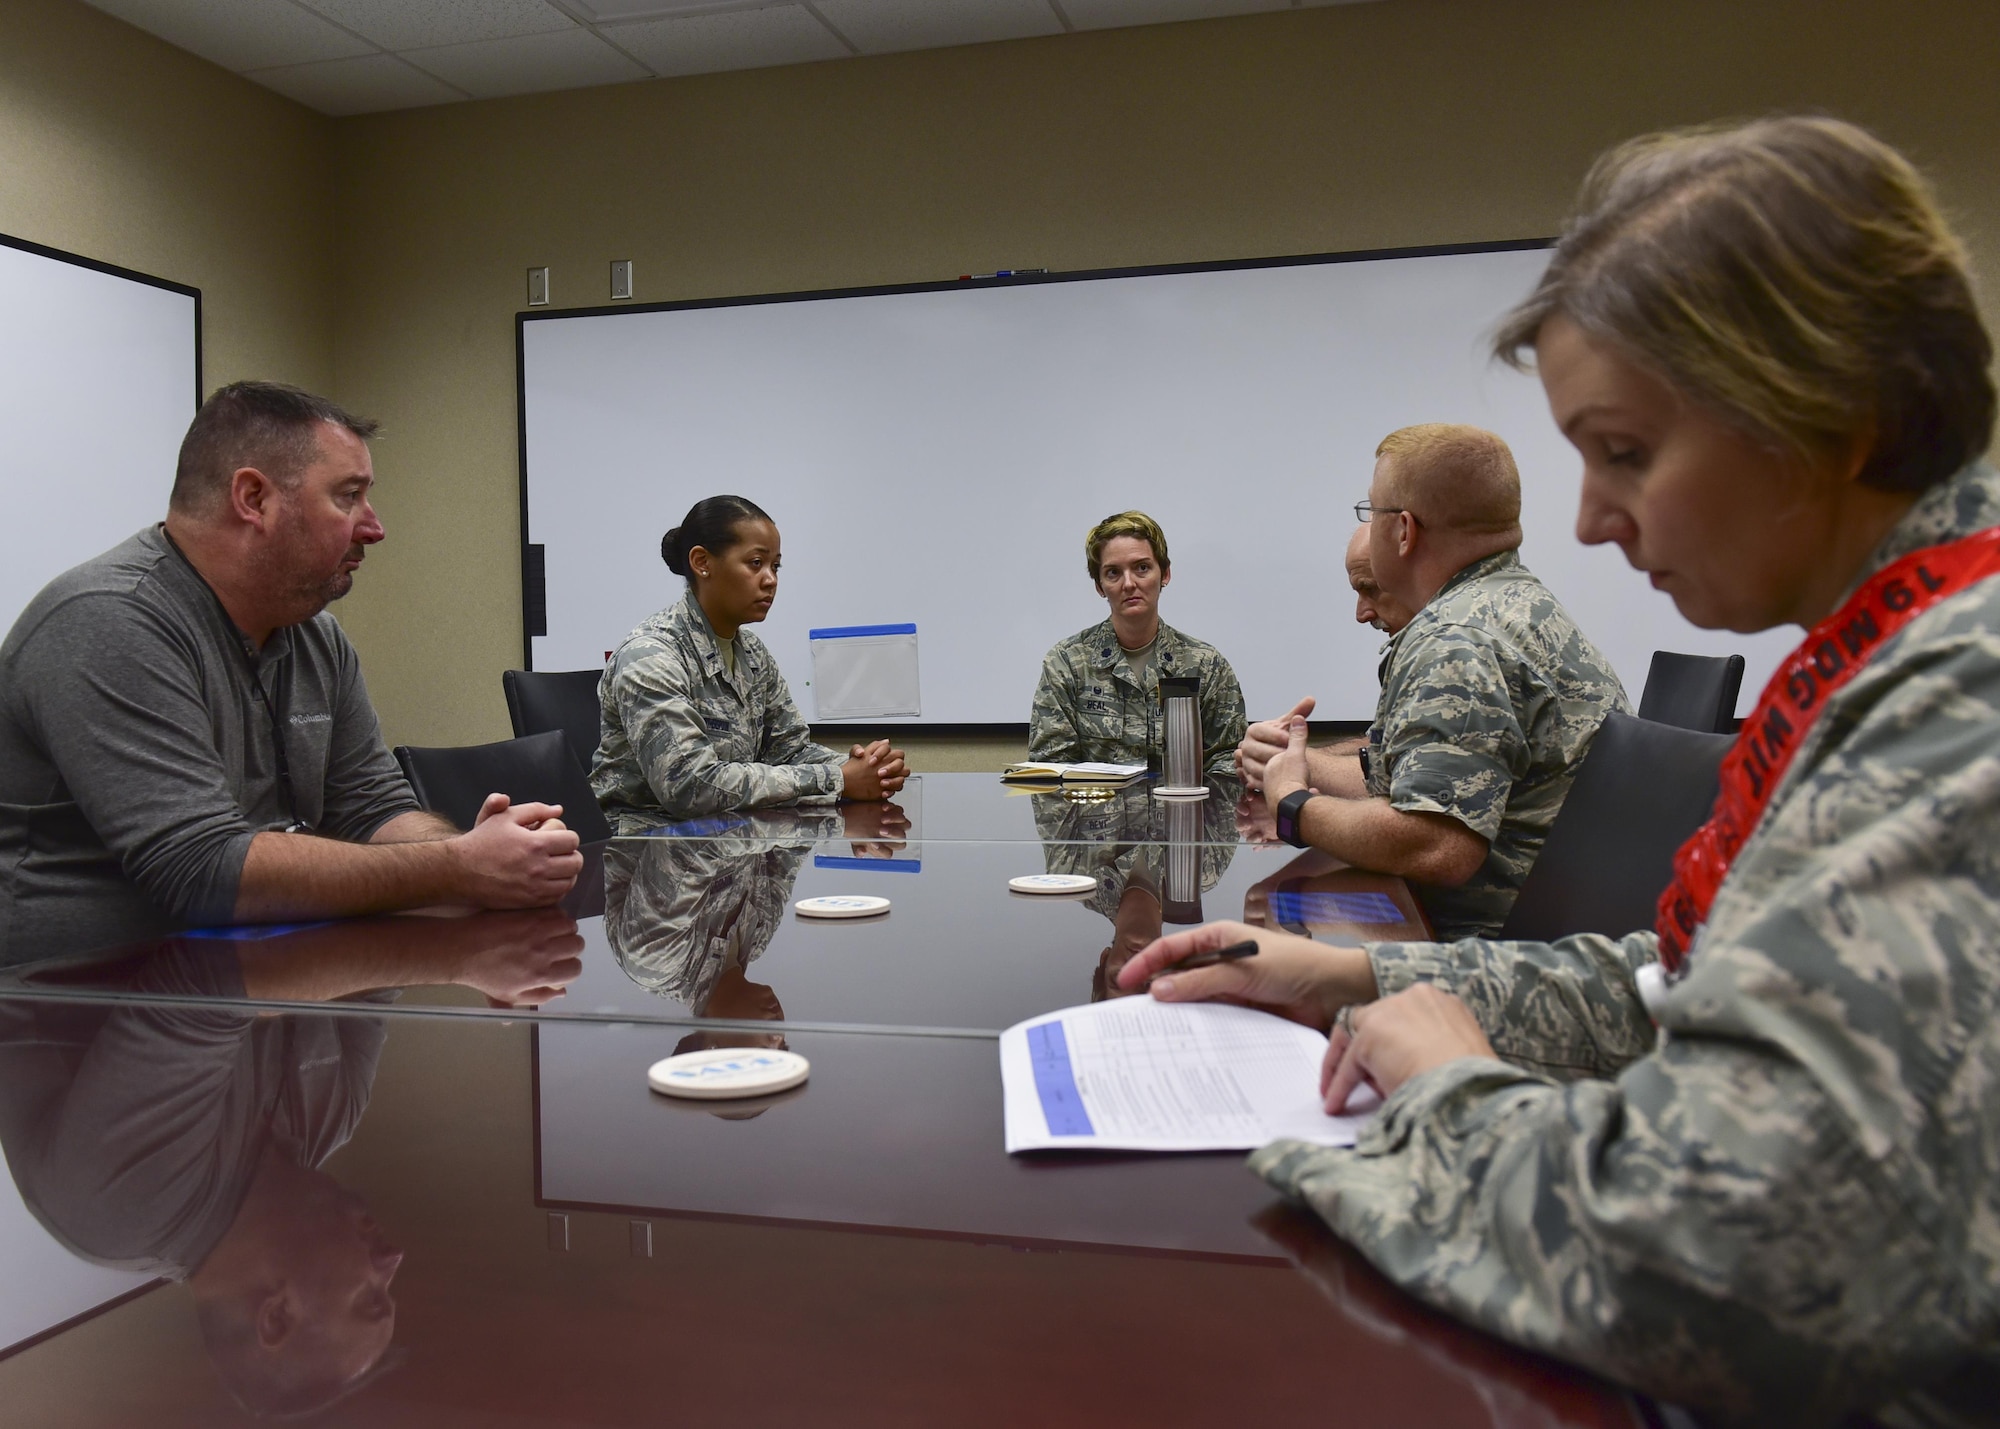 Lt. Col. Elizabeth Beal, 19th Medical Operations Squadron commander, is briefed on the situation of a medical group exercise August 24, 2017 at Little Rock Air Force Base, Ark. The exercise had an emphasis on readiness. (U.S. Air Force photo by Airman Rhett Isbell)